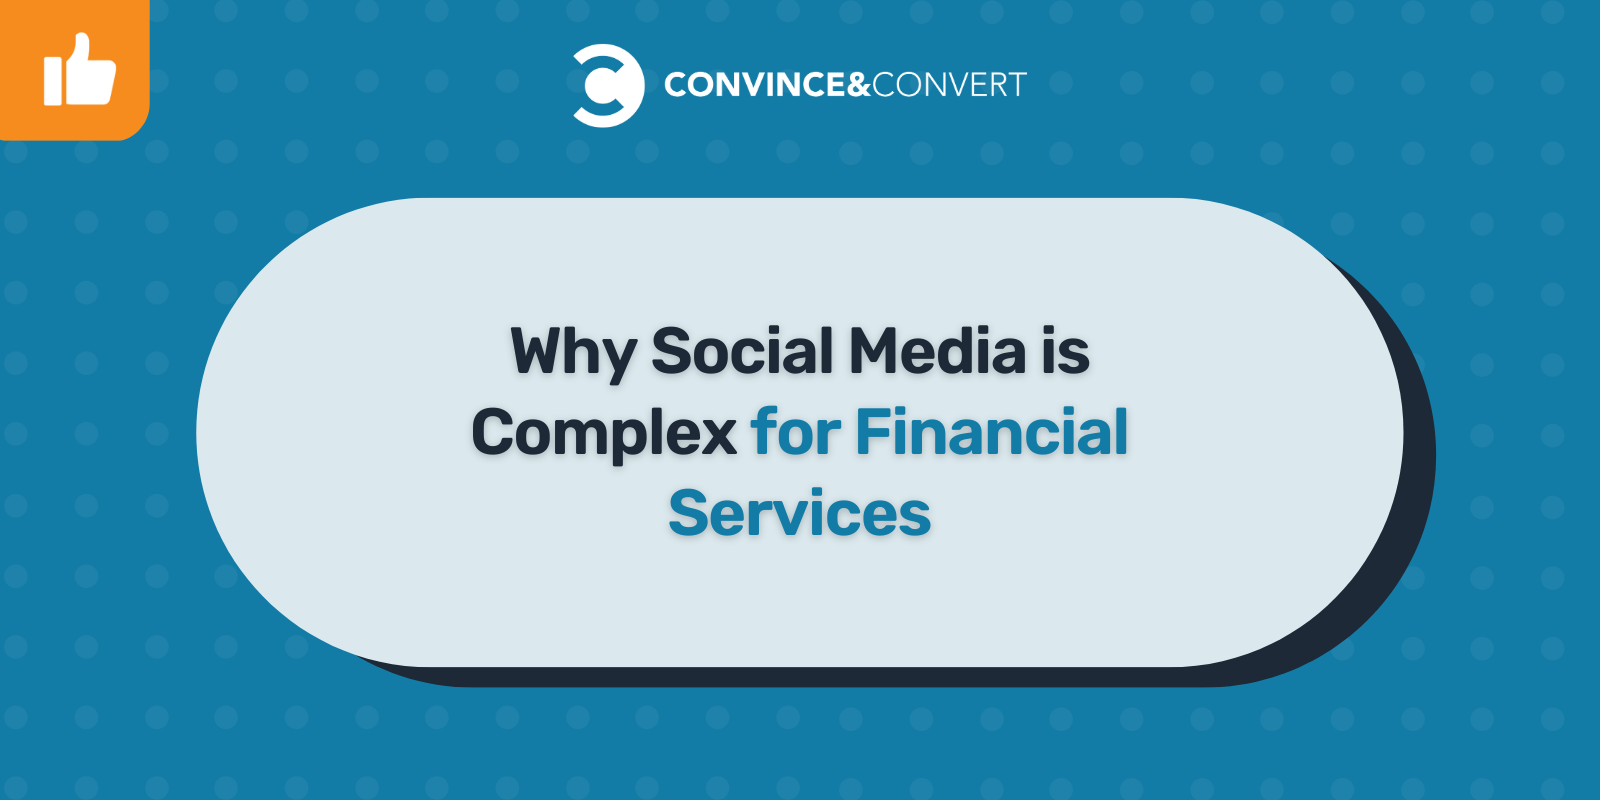 You are currently viewing Why Social Media is Complex for Financial Services